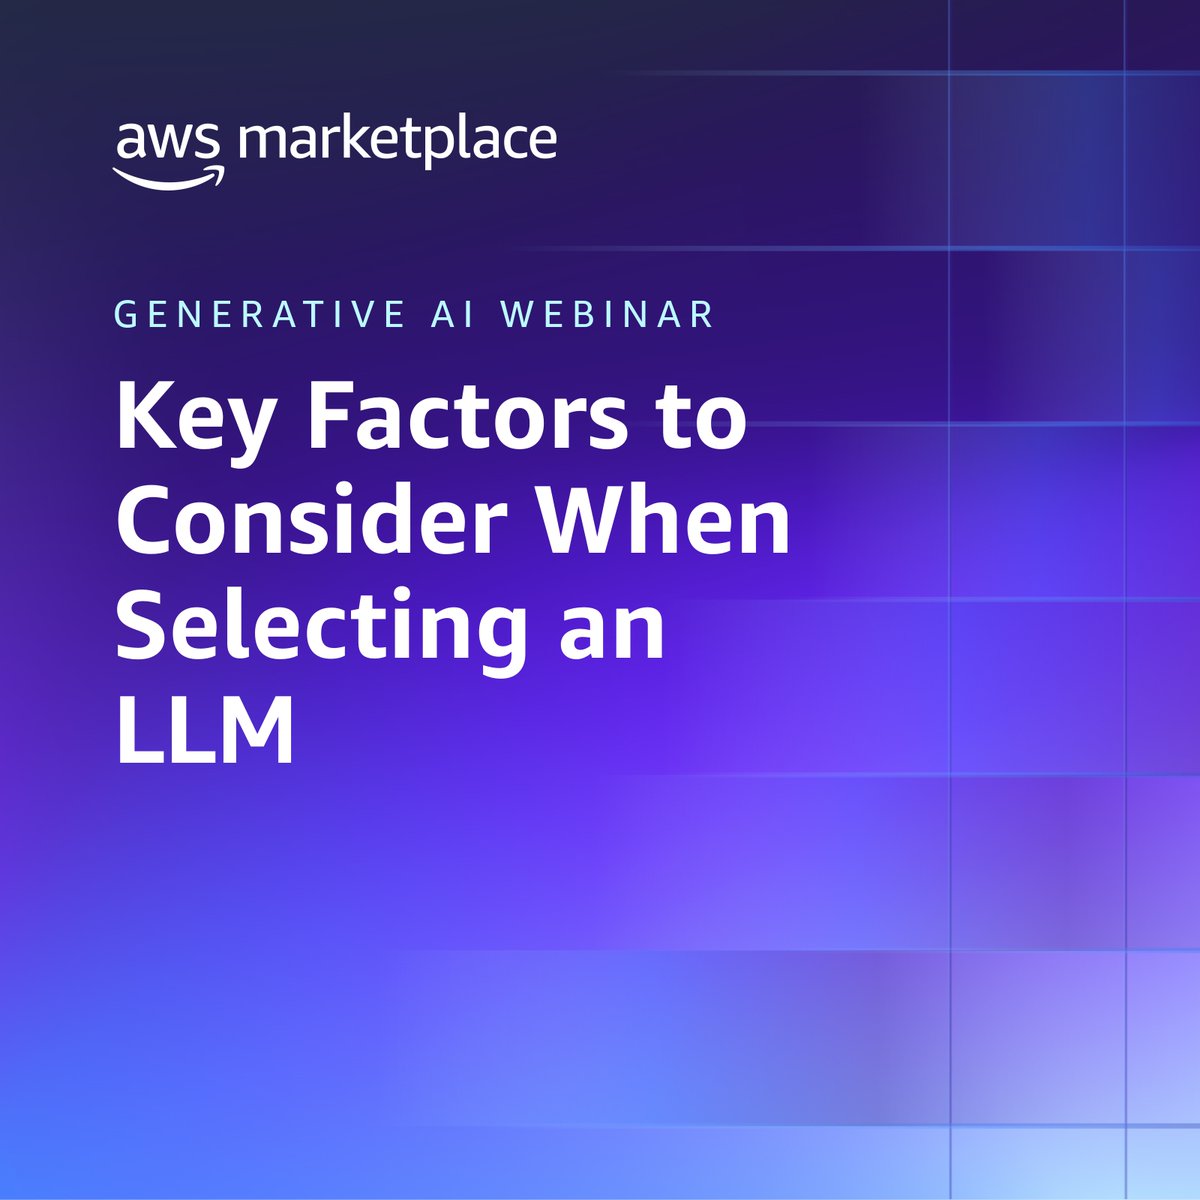 When selecting a large language model (LLM) for generative AI tasks, it's important to consider factors like accuracy, speed, cost, and responsibility. Join our #generativeai webinar on March 27 featuring speakers from AWS and @itsArthurAI. Register here: go.aws/3vgb5Wg